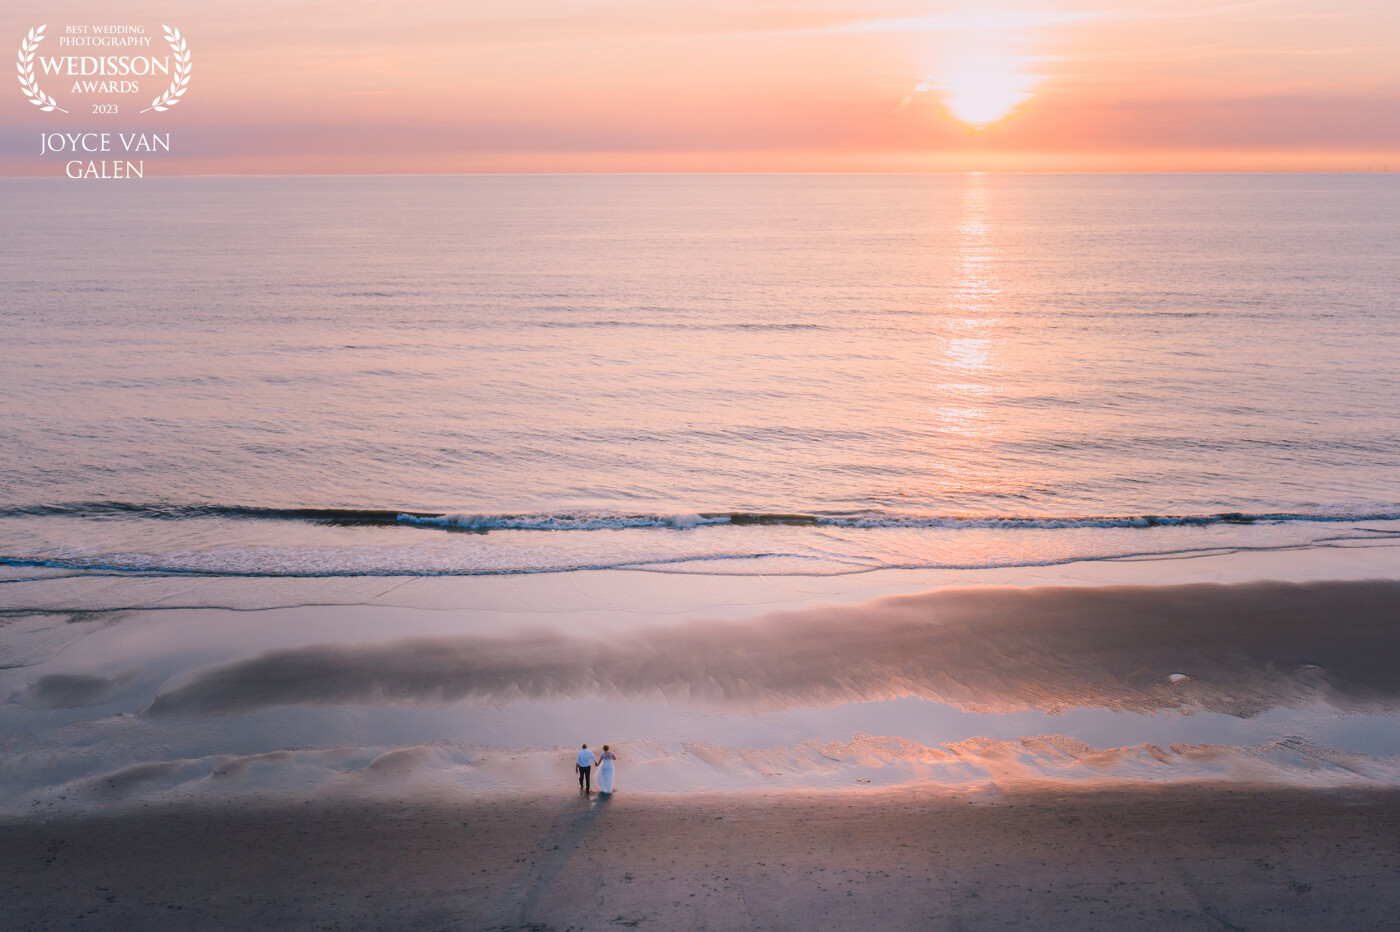 Always count me in for a photoshoot at sunset. The orange, pink, purple hues are so magical. This image is taken with a drone and with the wedding couple on the beach... no words!